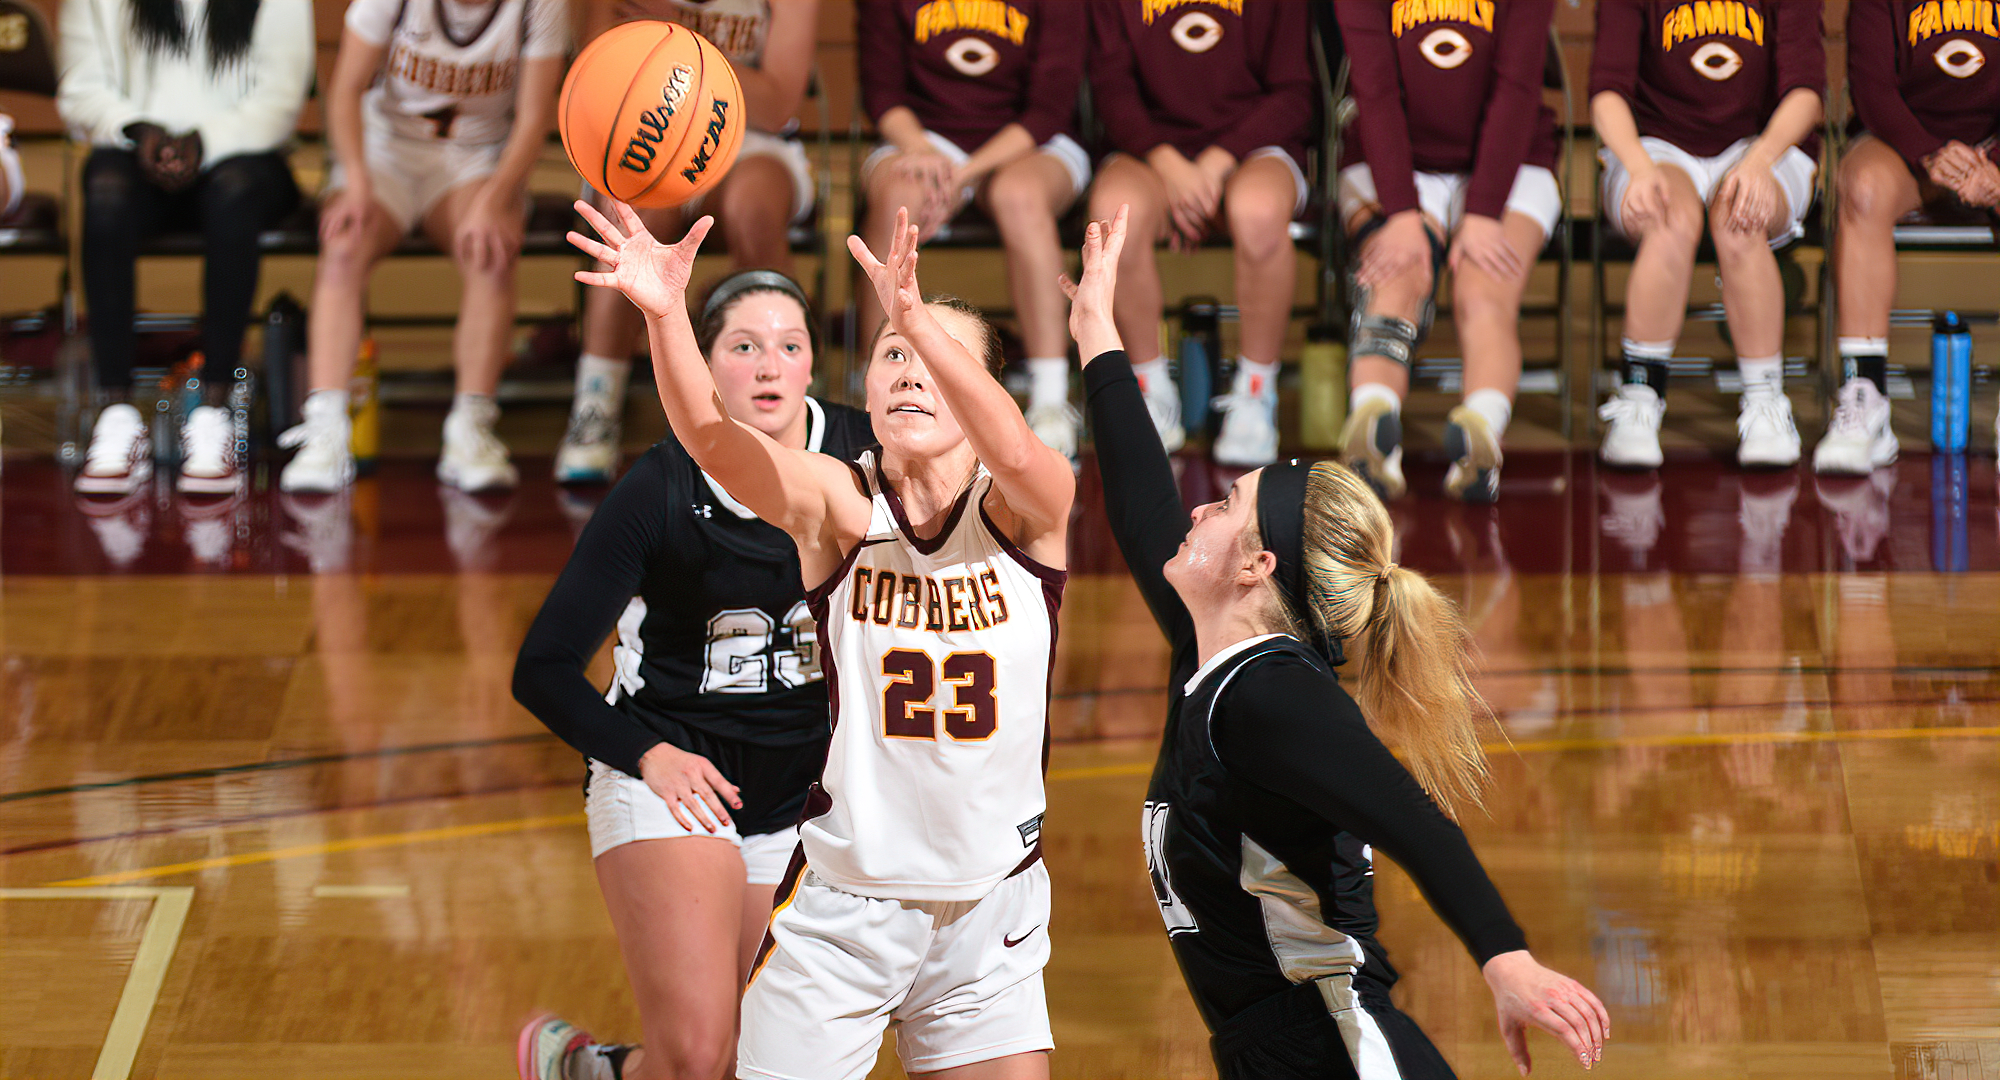 Symone Beld grabbed a team-high five rebounds and scored eight points in the Cobbers 72-54 win at Macalester.